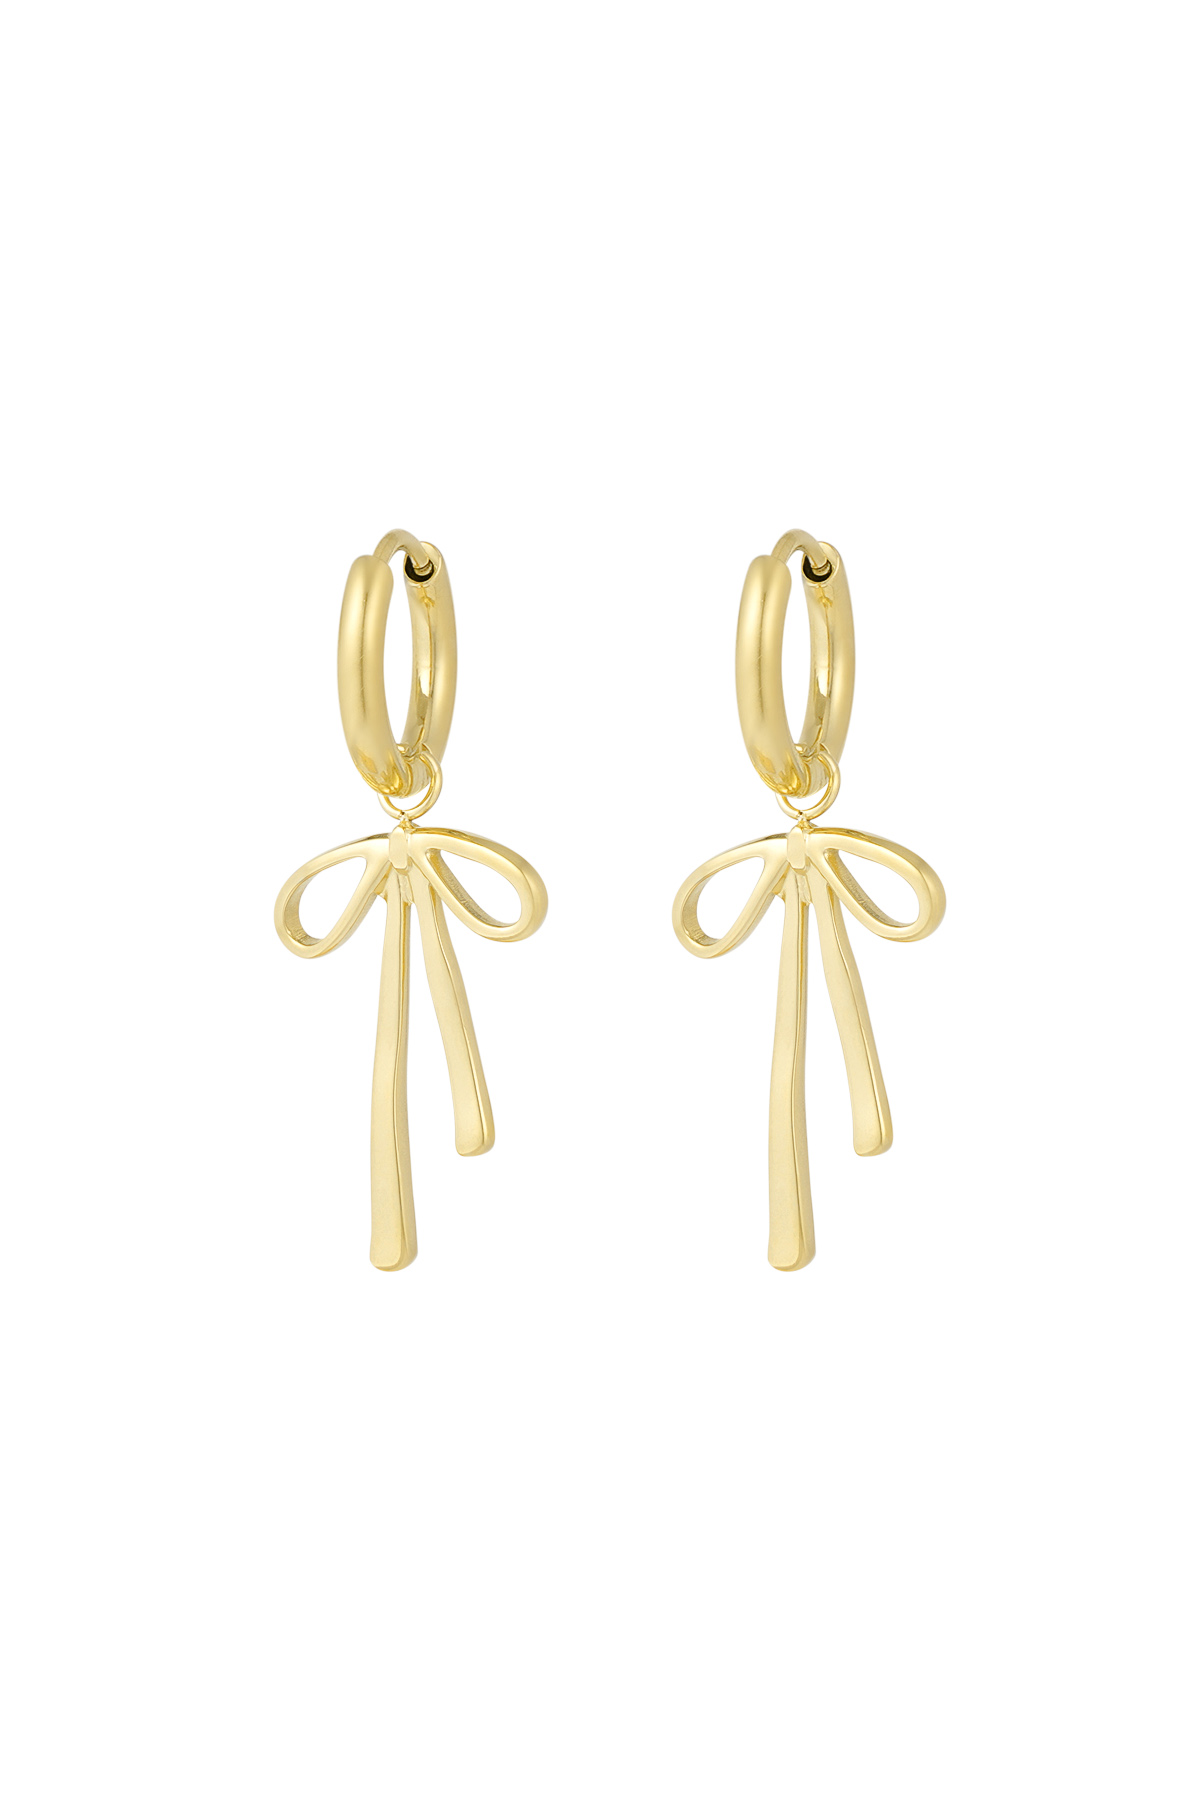 Hanging bow earrings - gold h5 